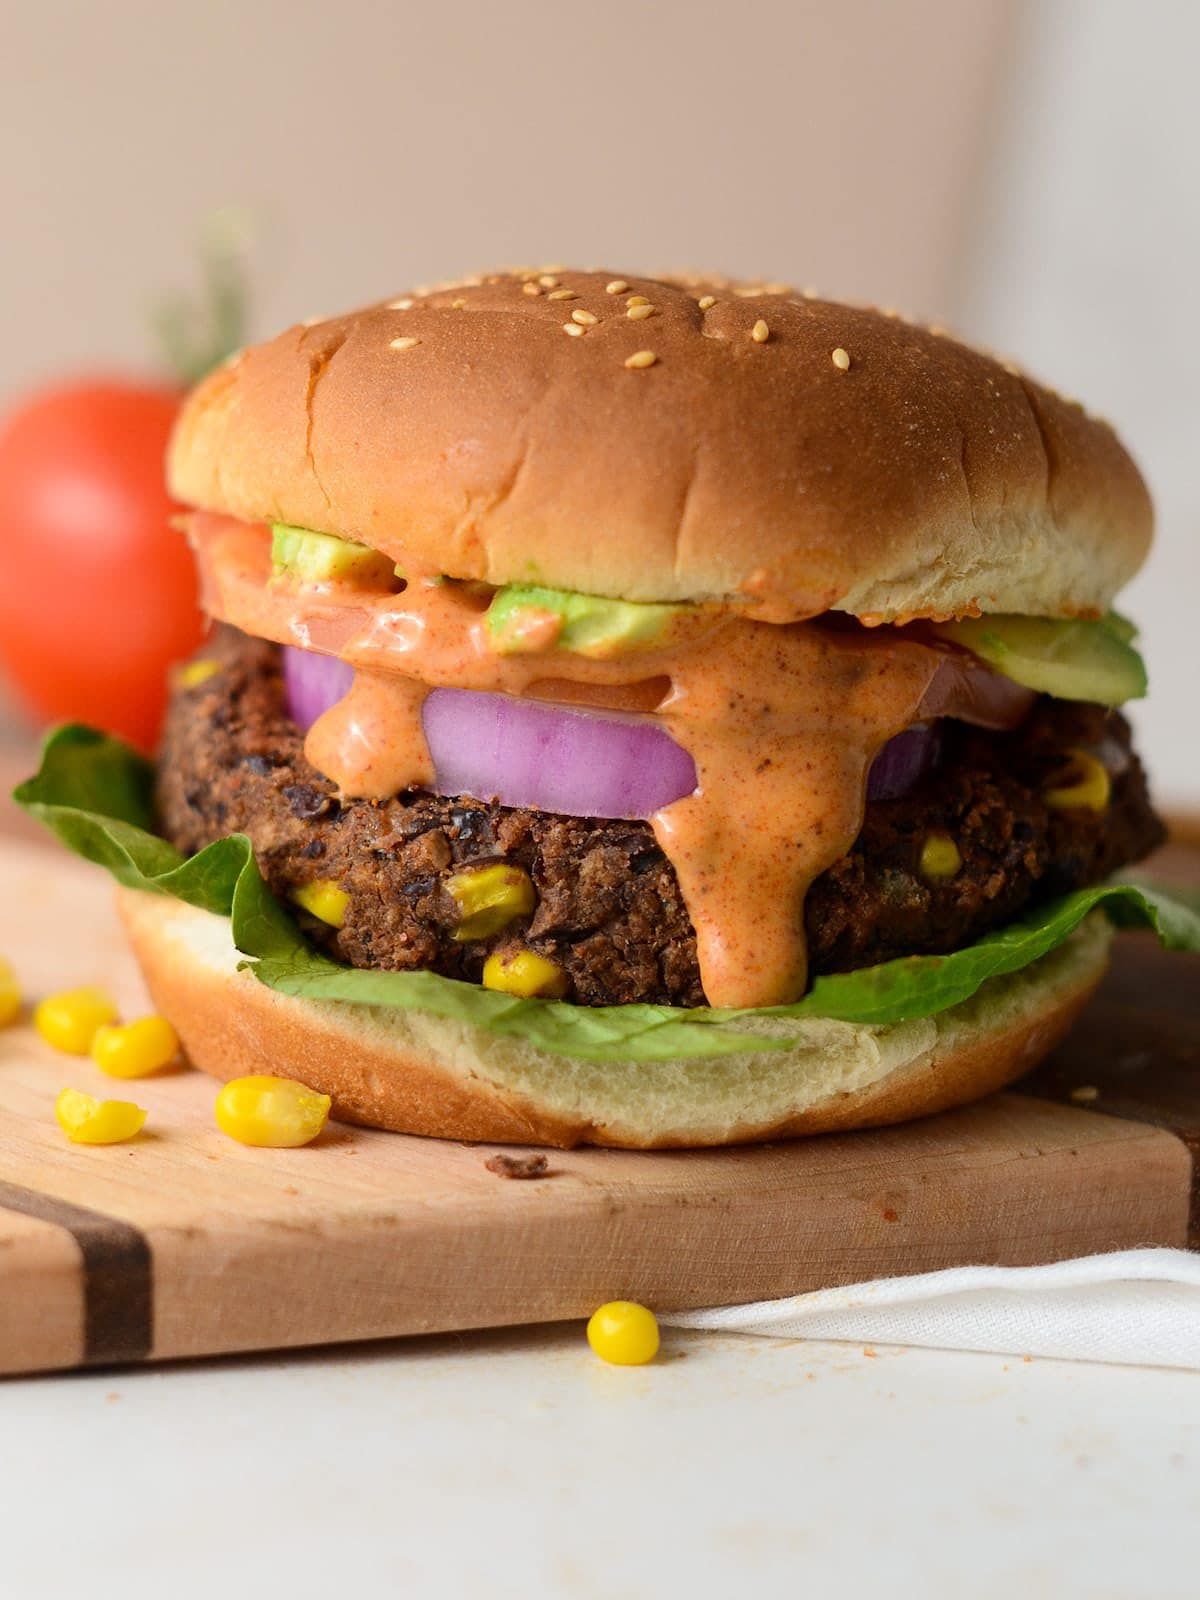 This is a photo of a southwest black bean burger with the burger sauce drizzle.